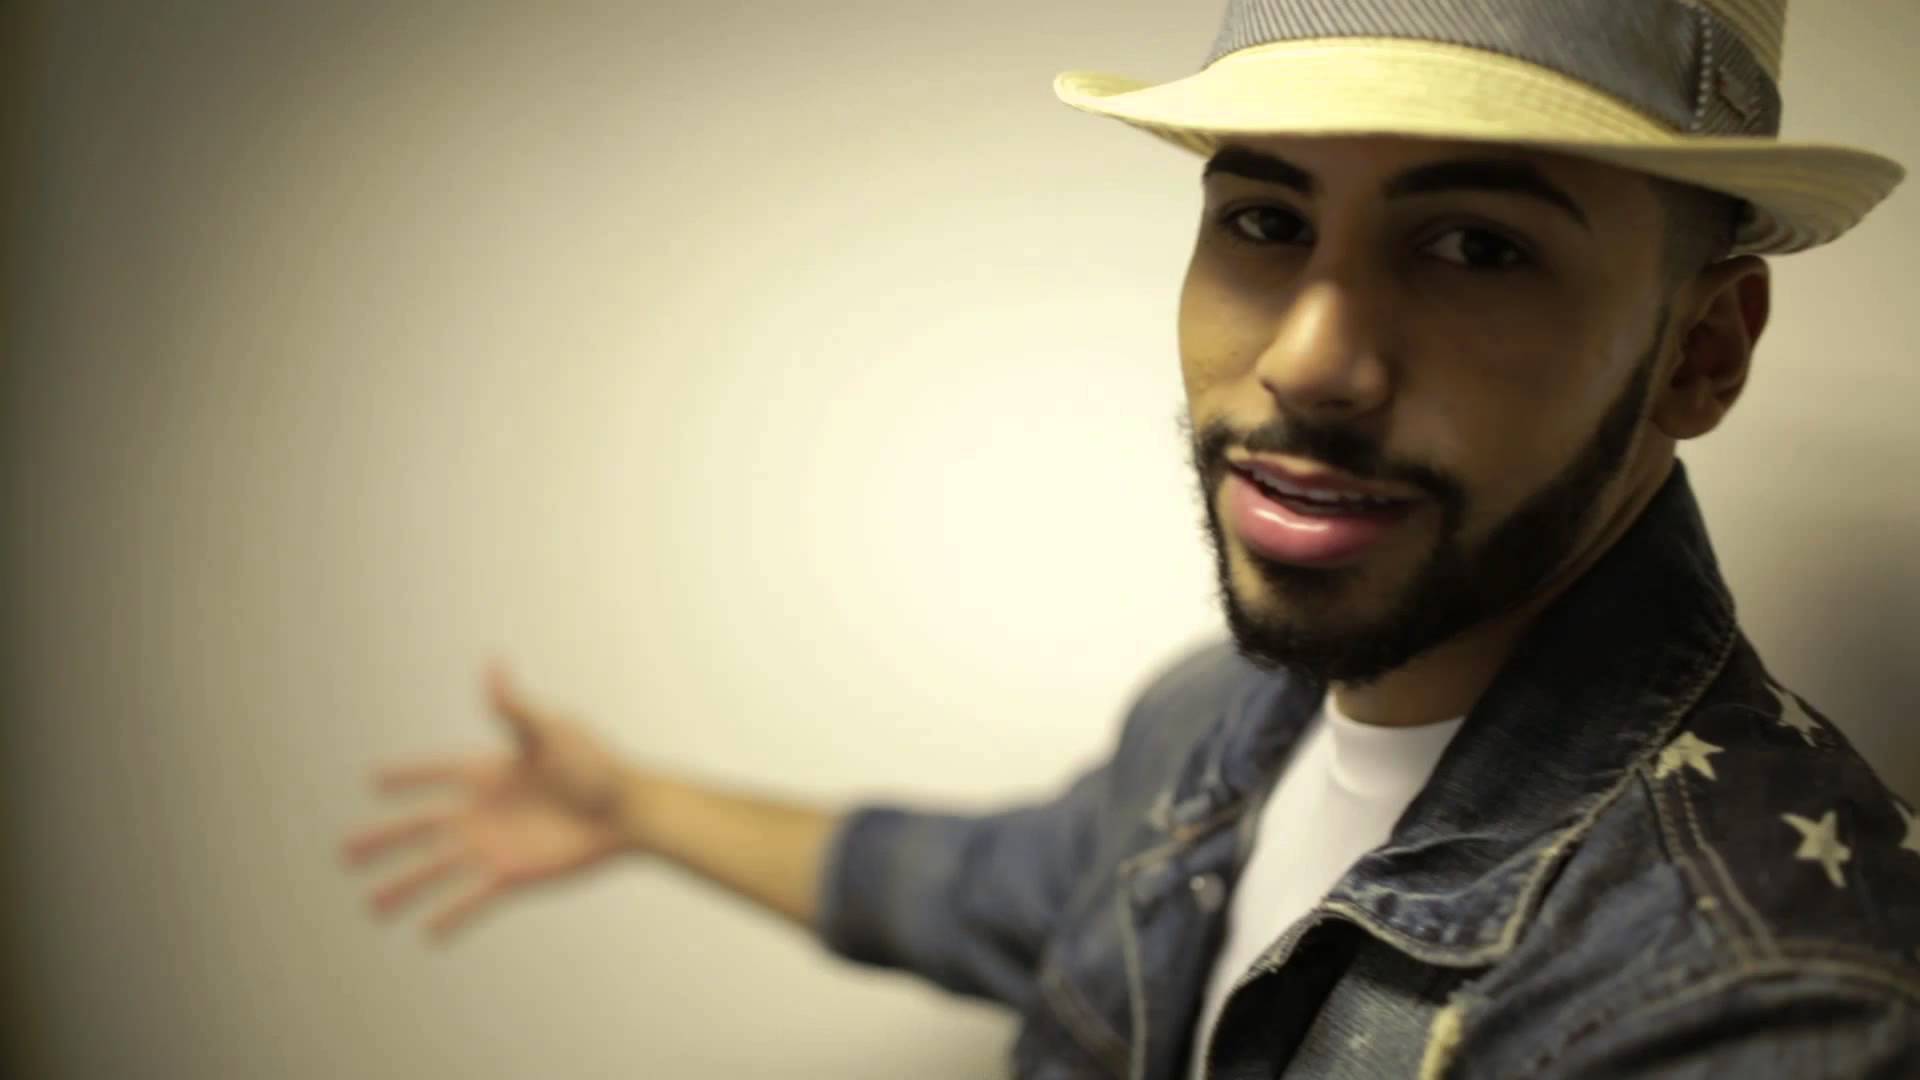 Known YouTube Prankster Adam Saleh Evicted from Delta Flight